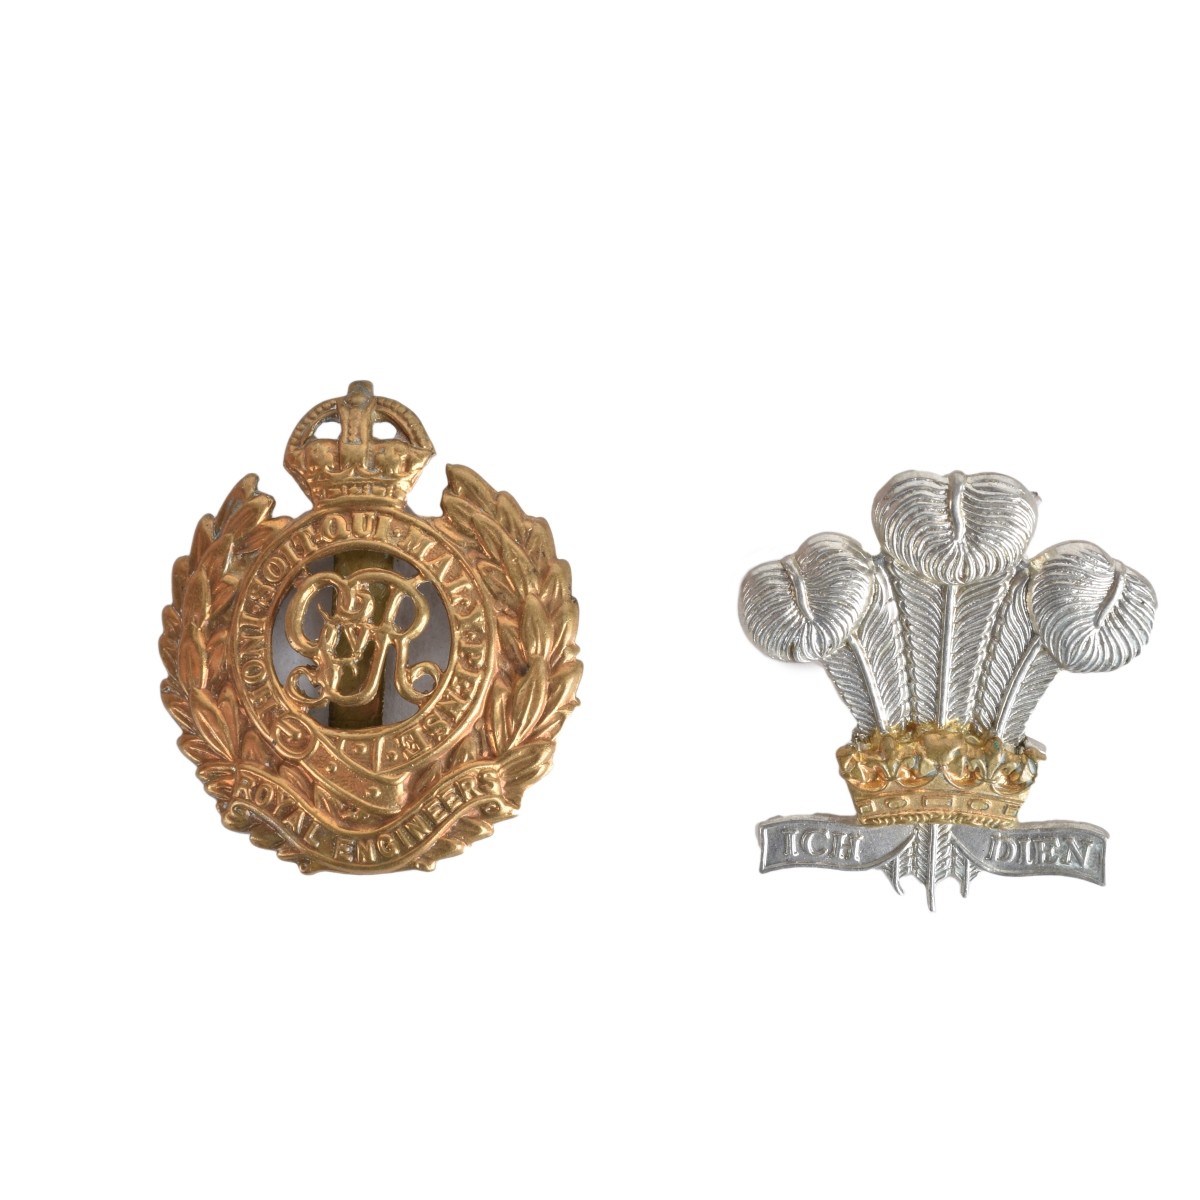 Military Pins and Badges - Image 2 of 4